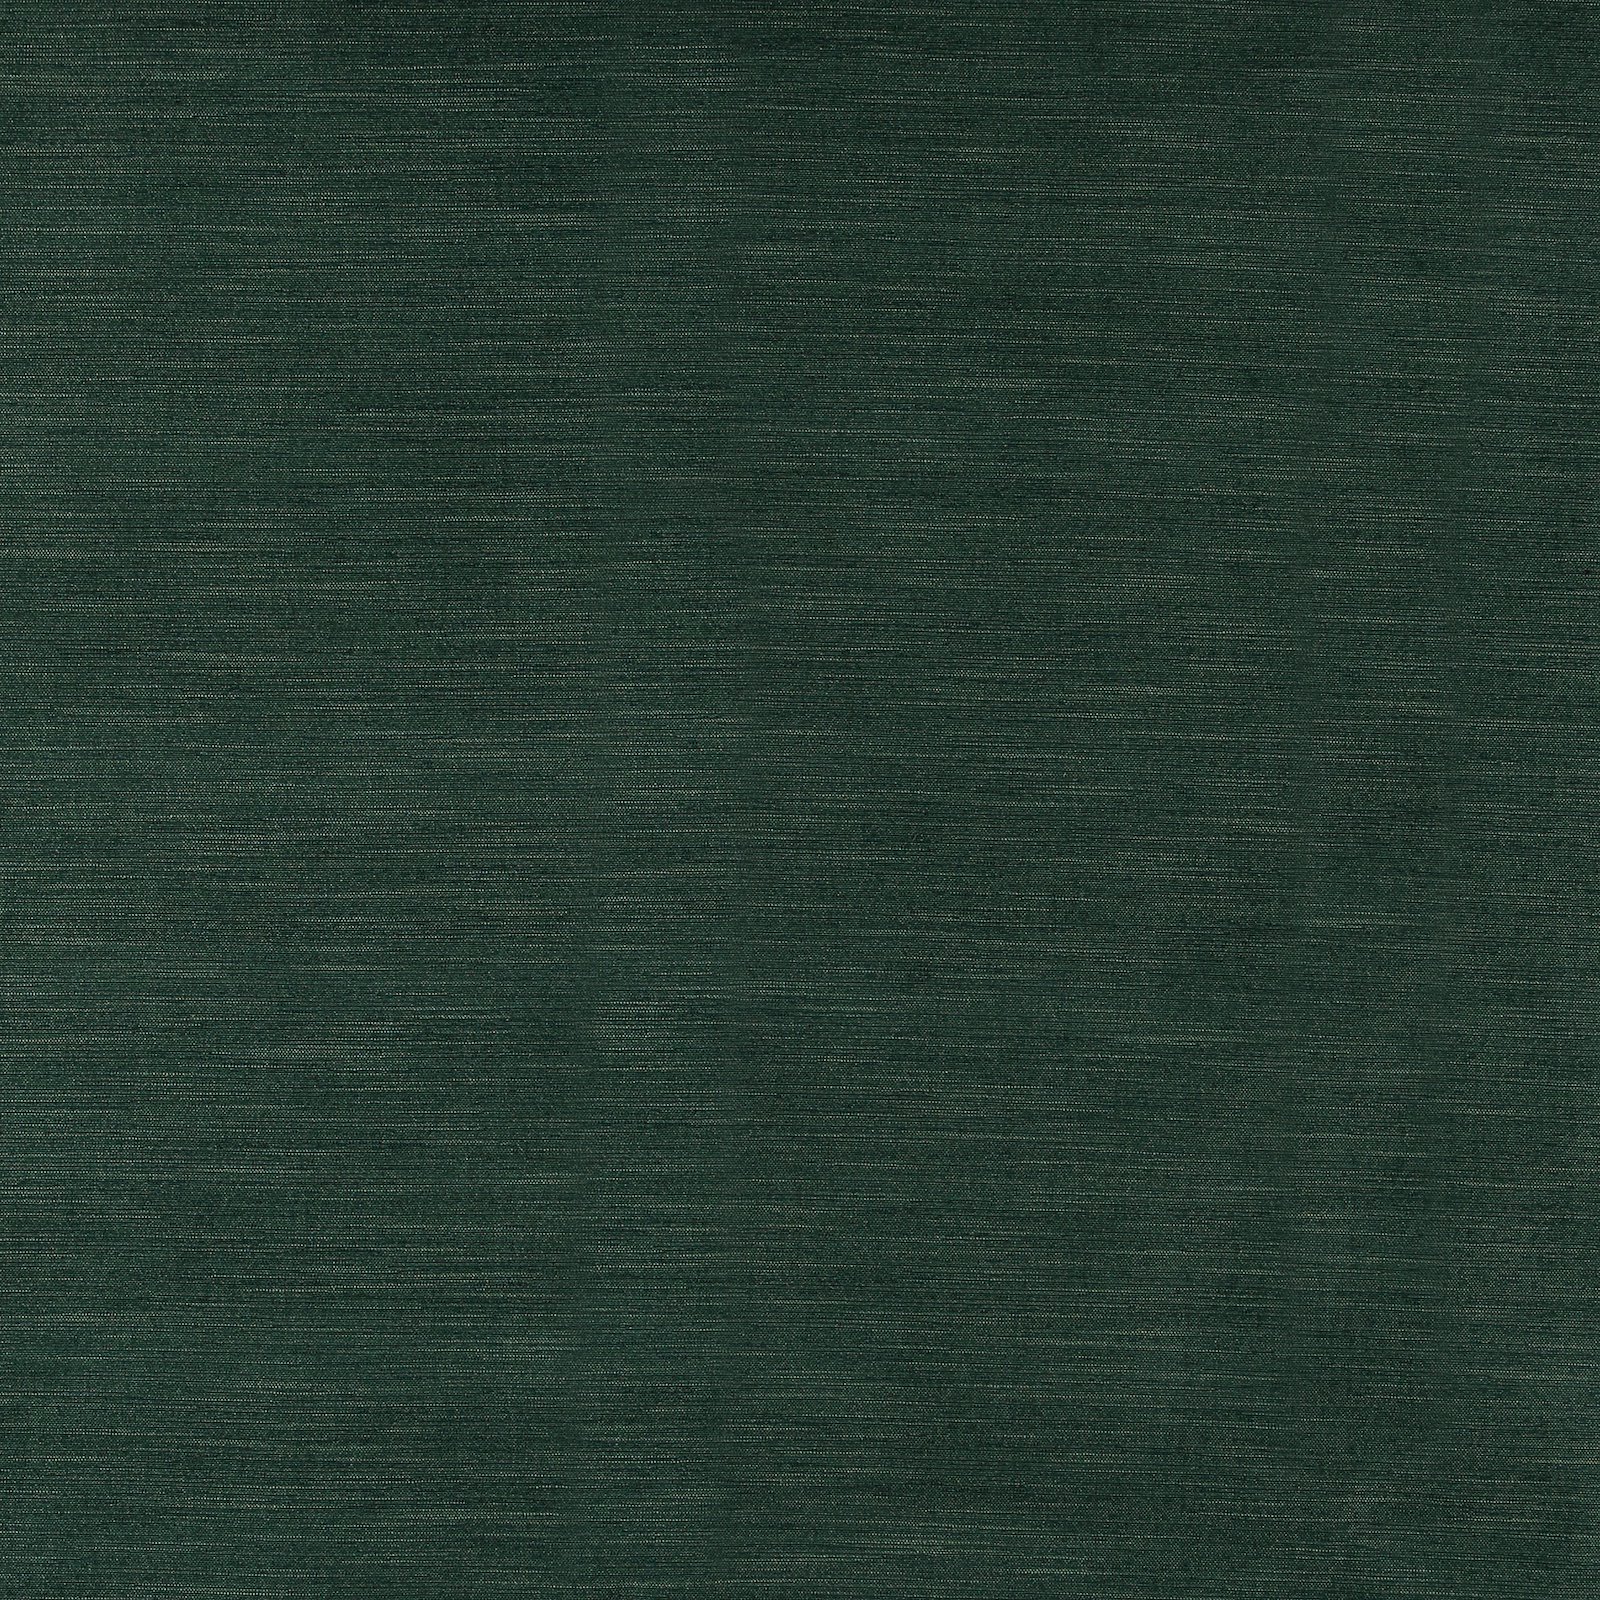 Recycled upholstery fabric green melange 823966_pack_solid